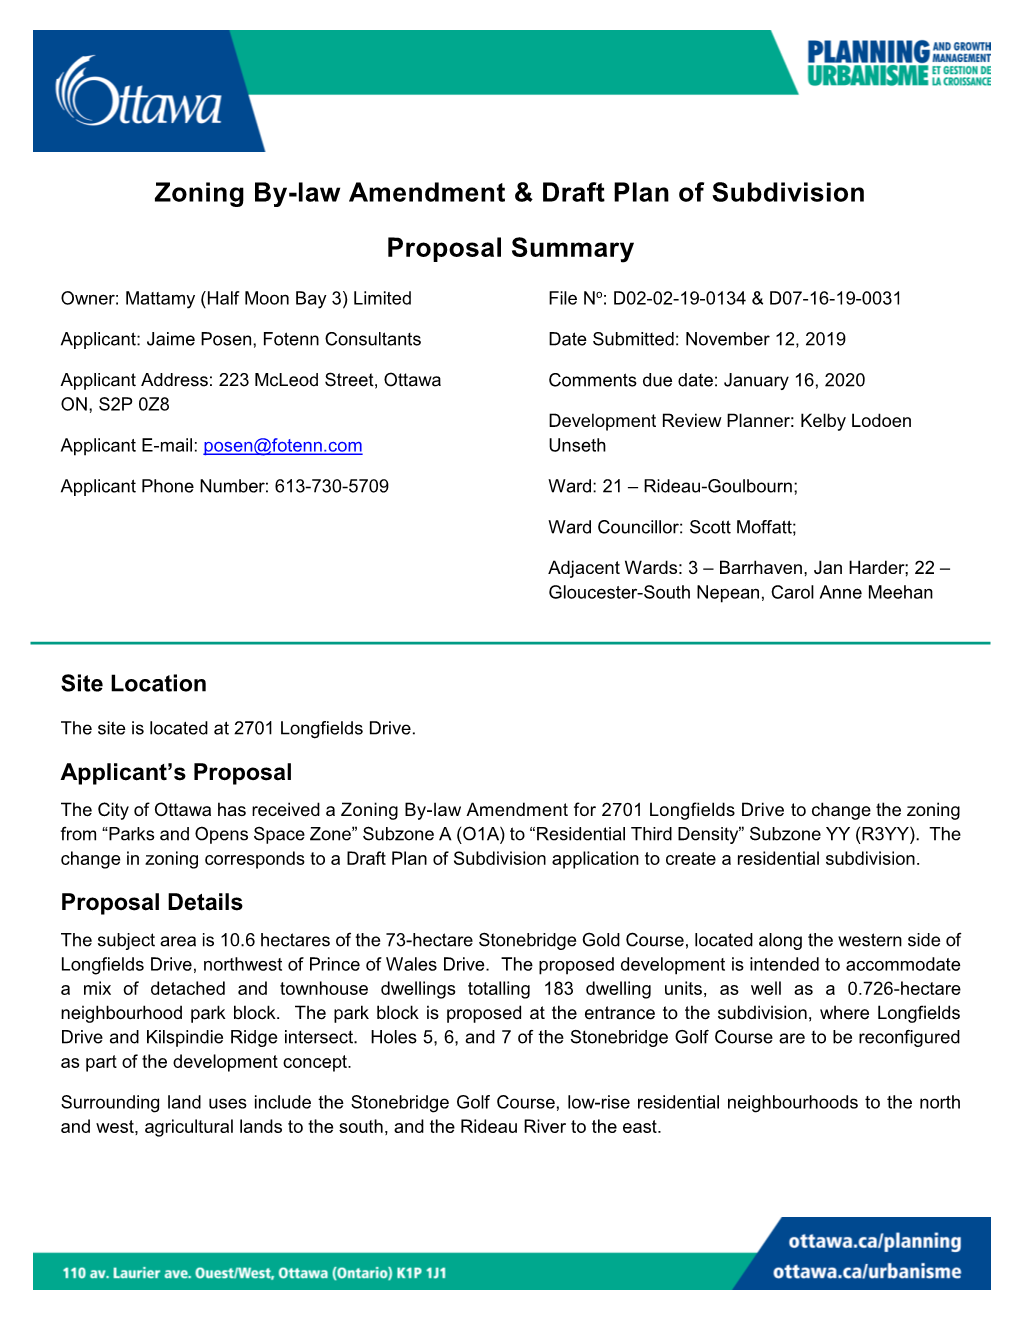 Zoning By-Law Amendment & Draft Plan of Subdivision Proposal